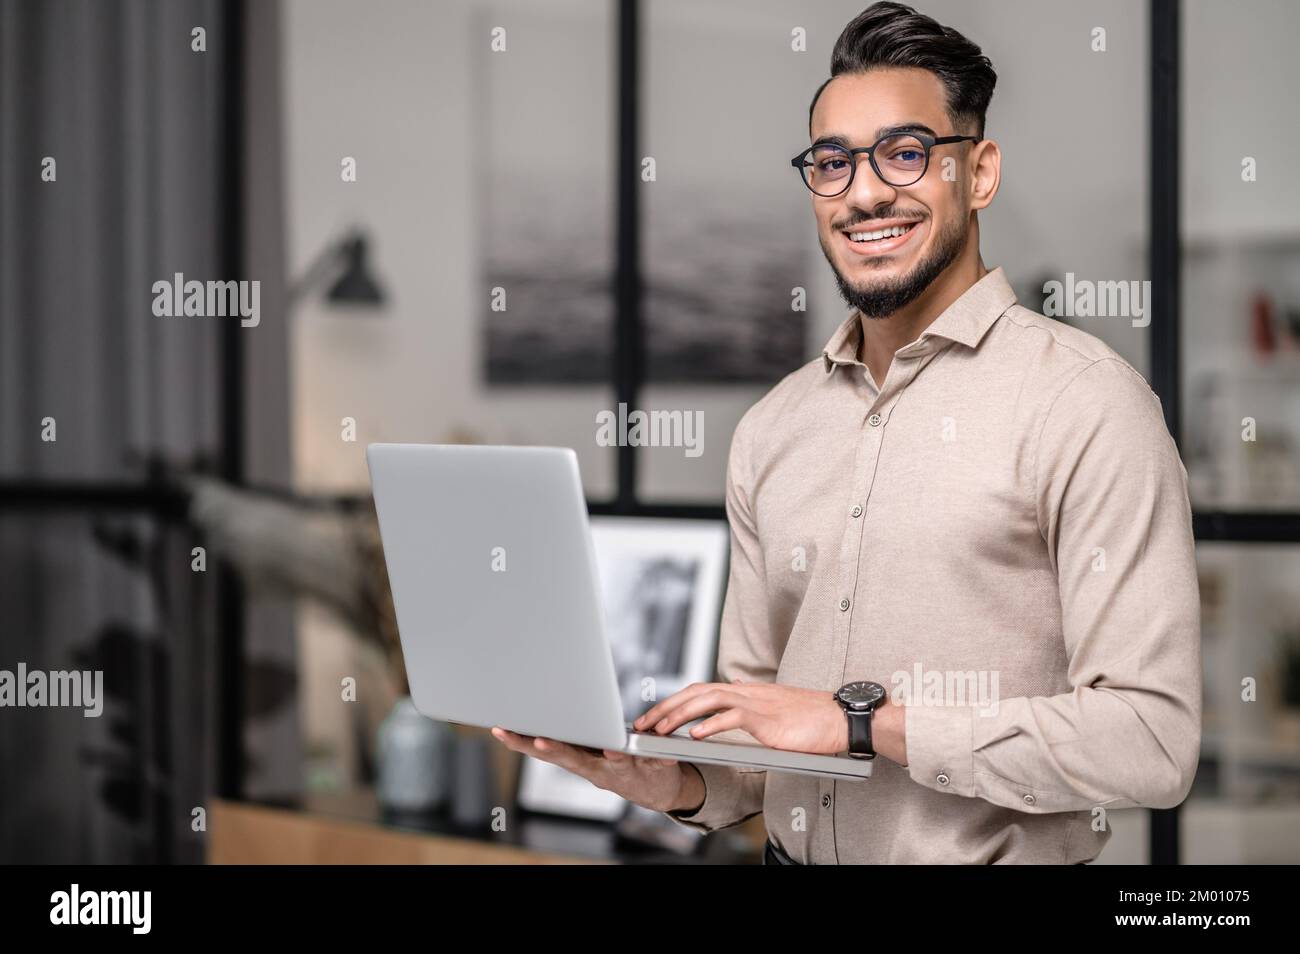 Good mood. A young businessman with a laptop looking cotented. Stock Photo